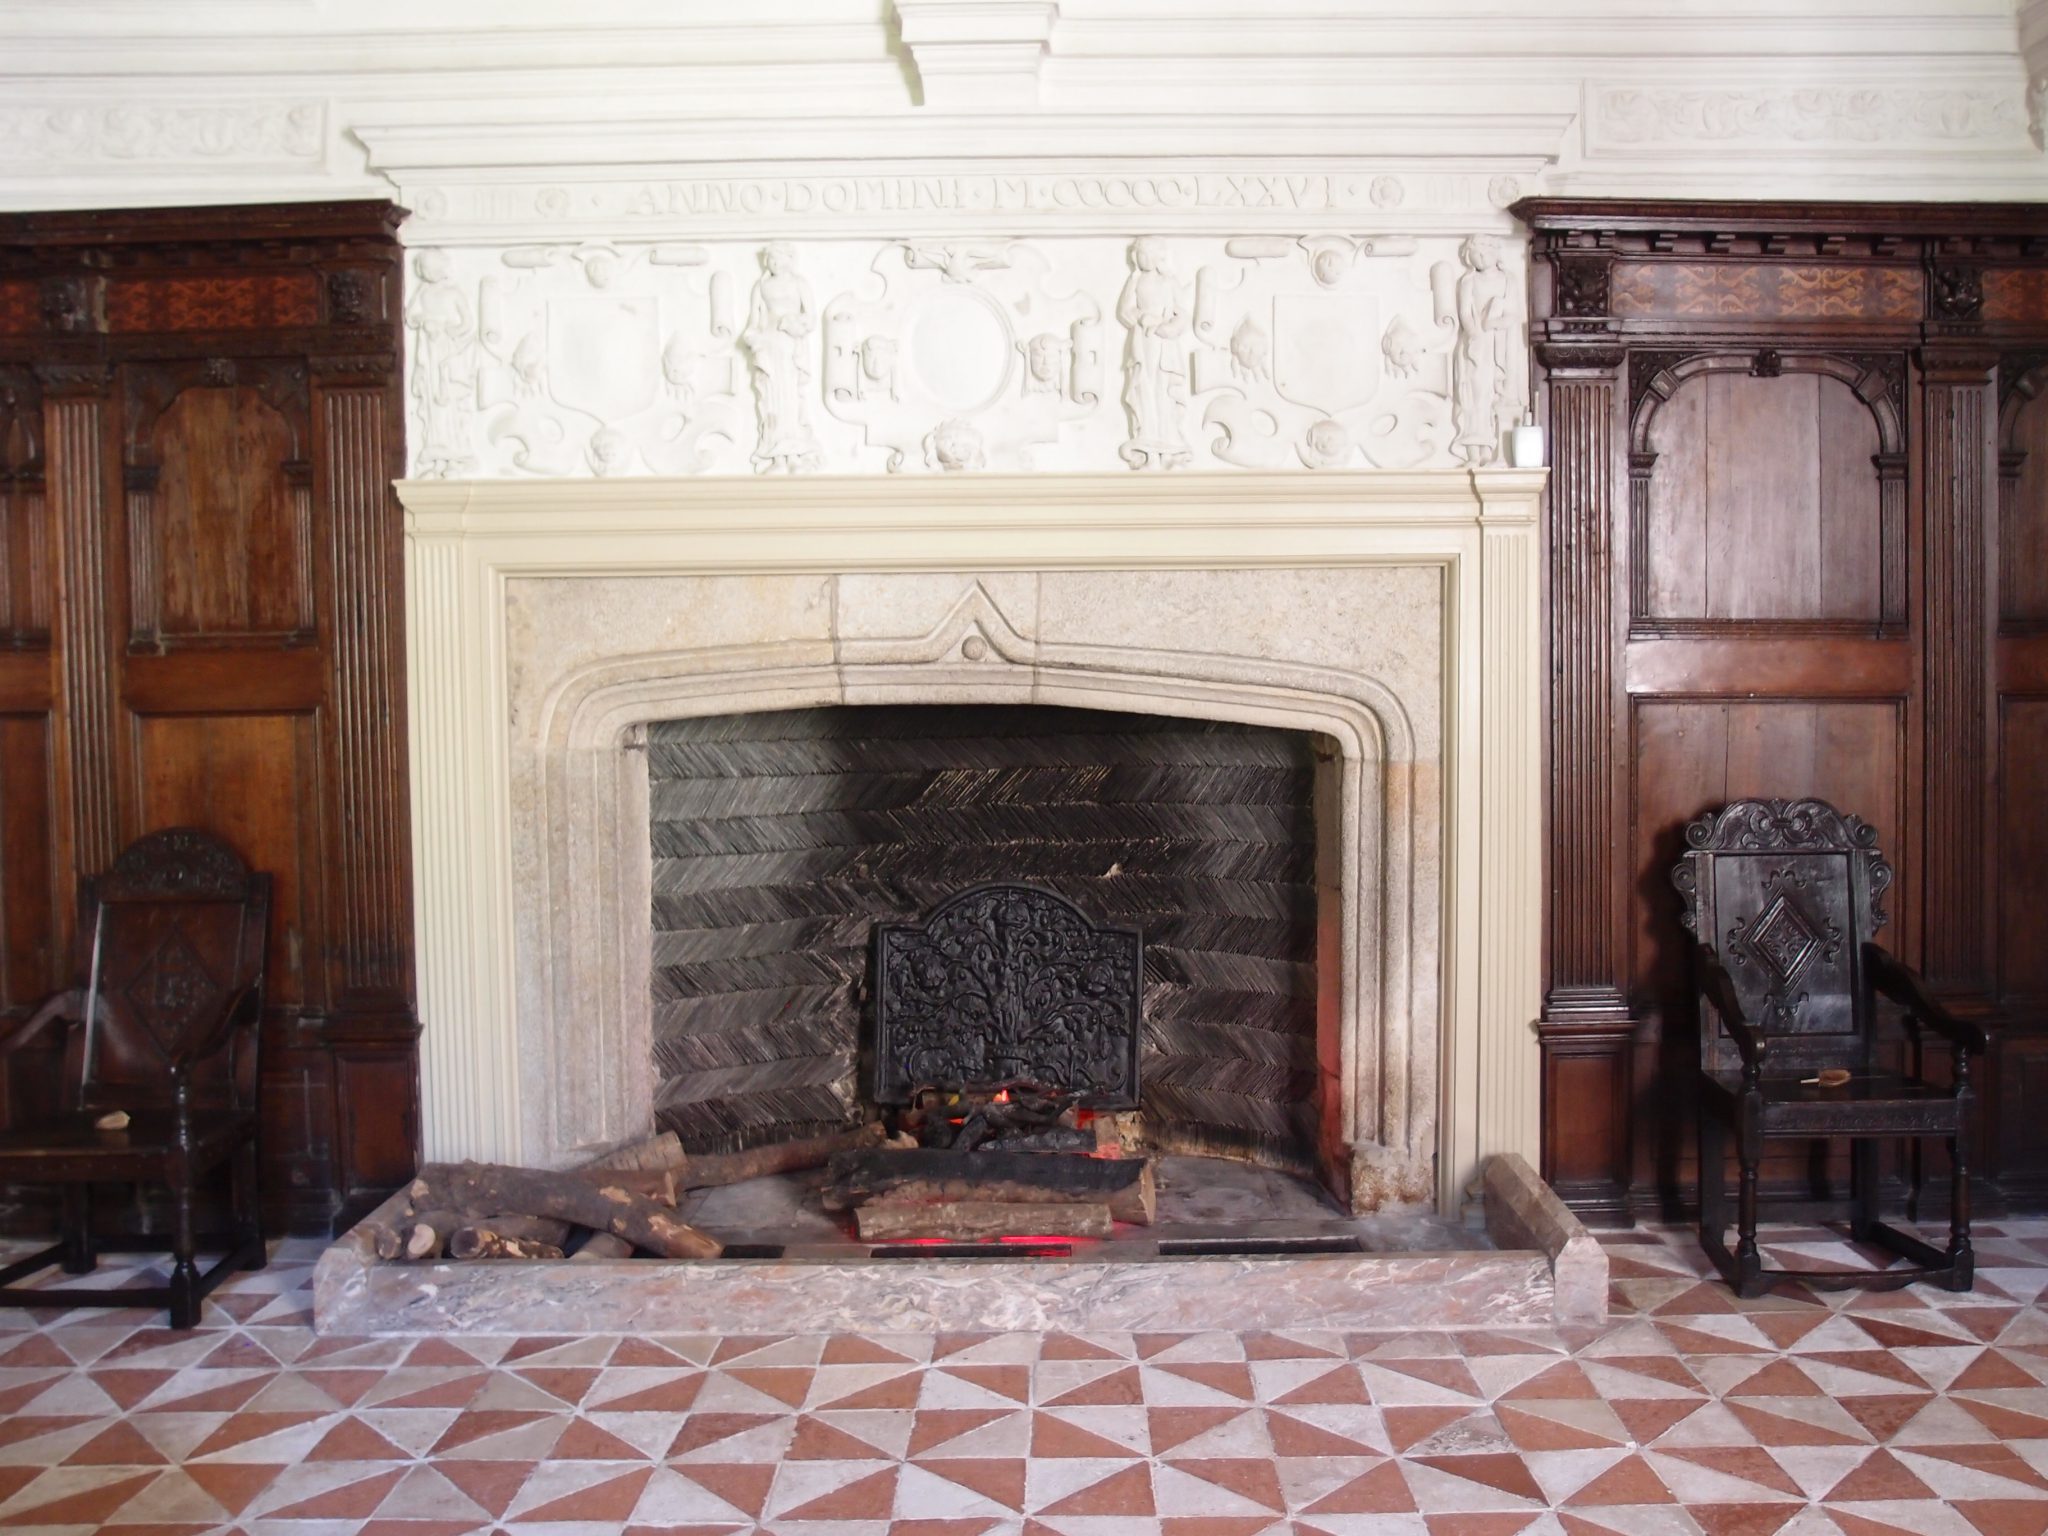 The Great Hall's granite fireplace, with herringbone pattern of slate at the back, is typical of the 16th century.